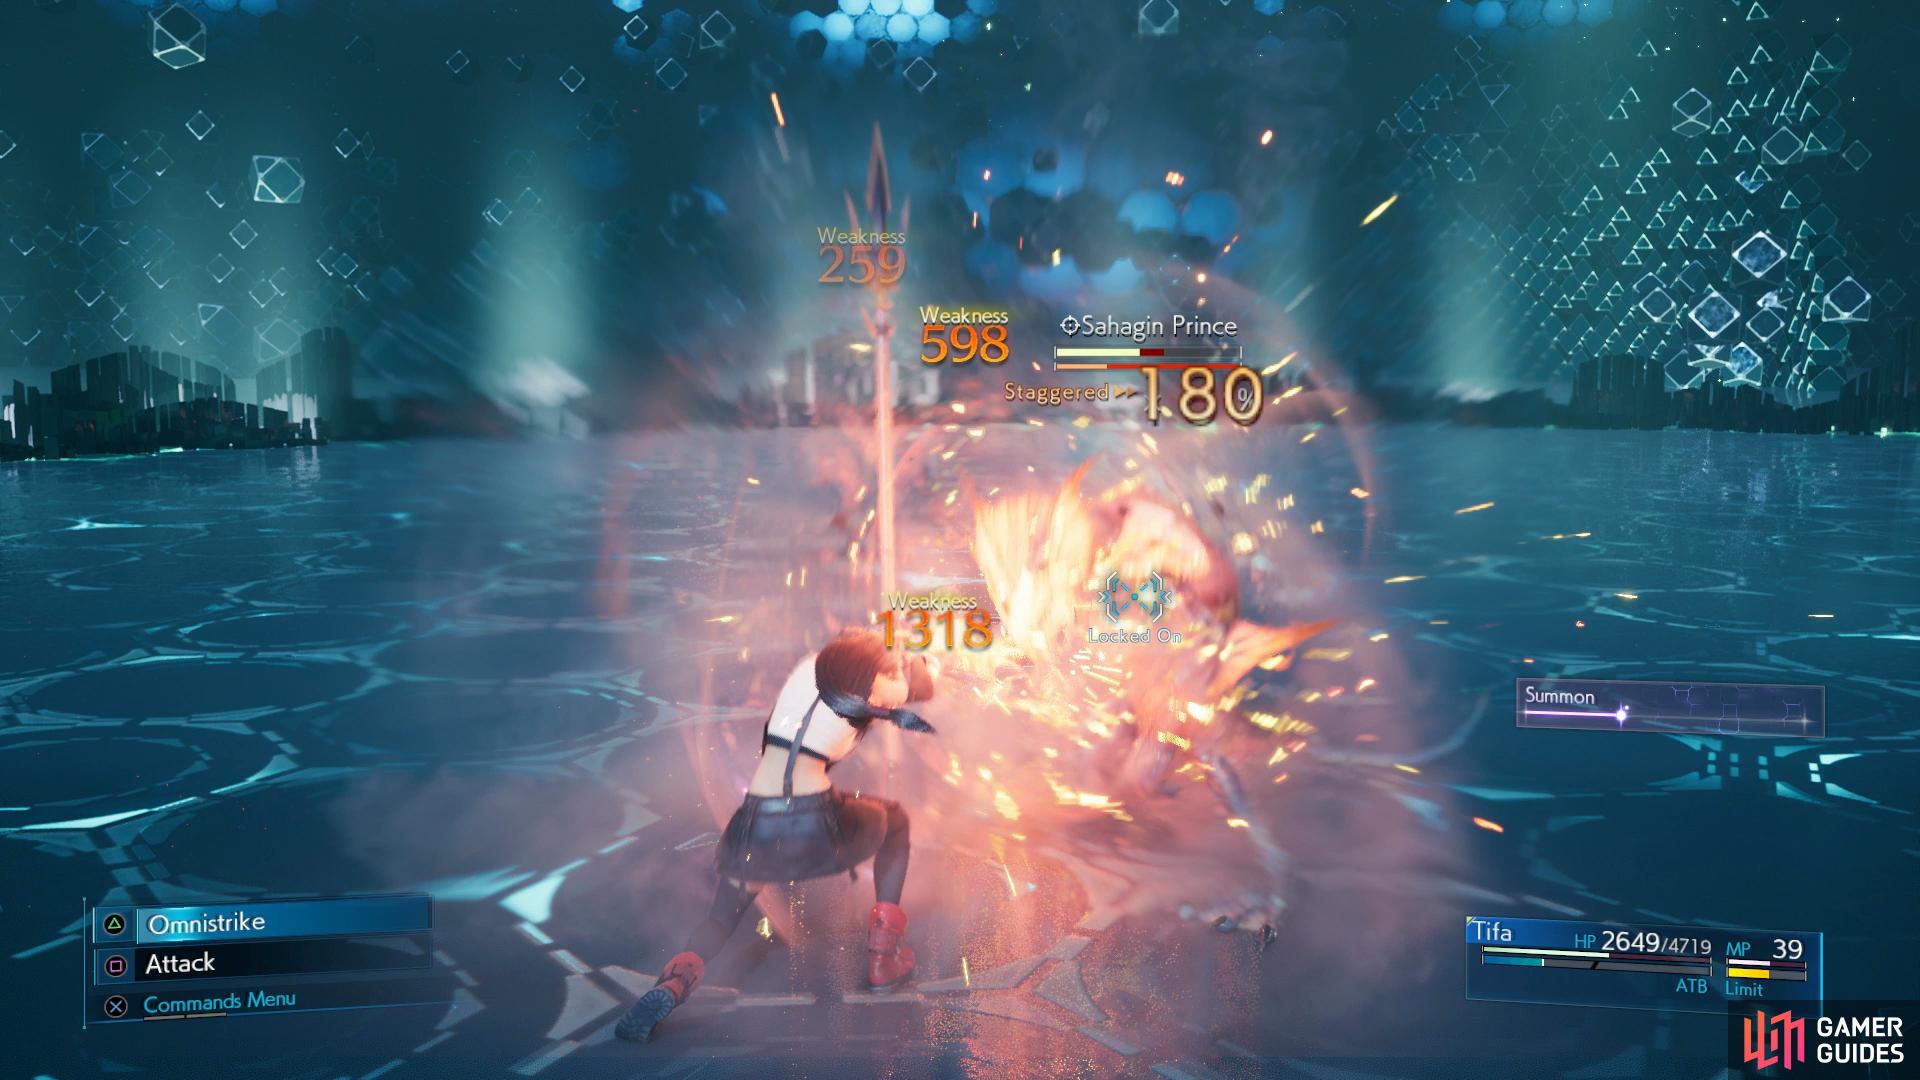 The Sahagin Prince is arguably Tifa’s most difficult opponent, don’t be afraid to use a Summon here if you need it.